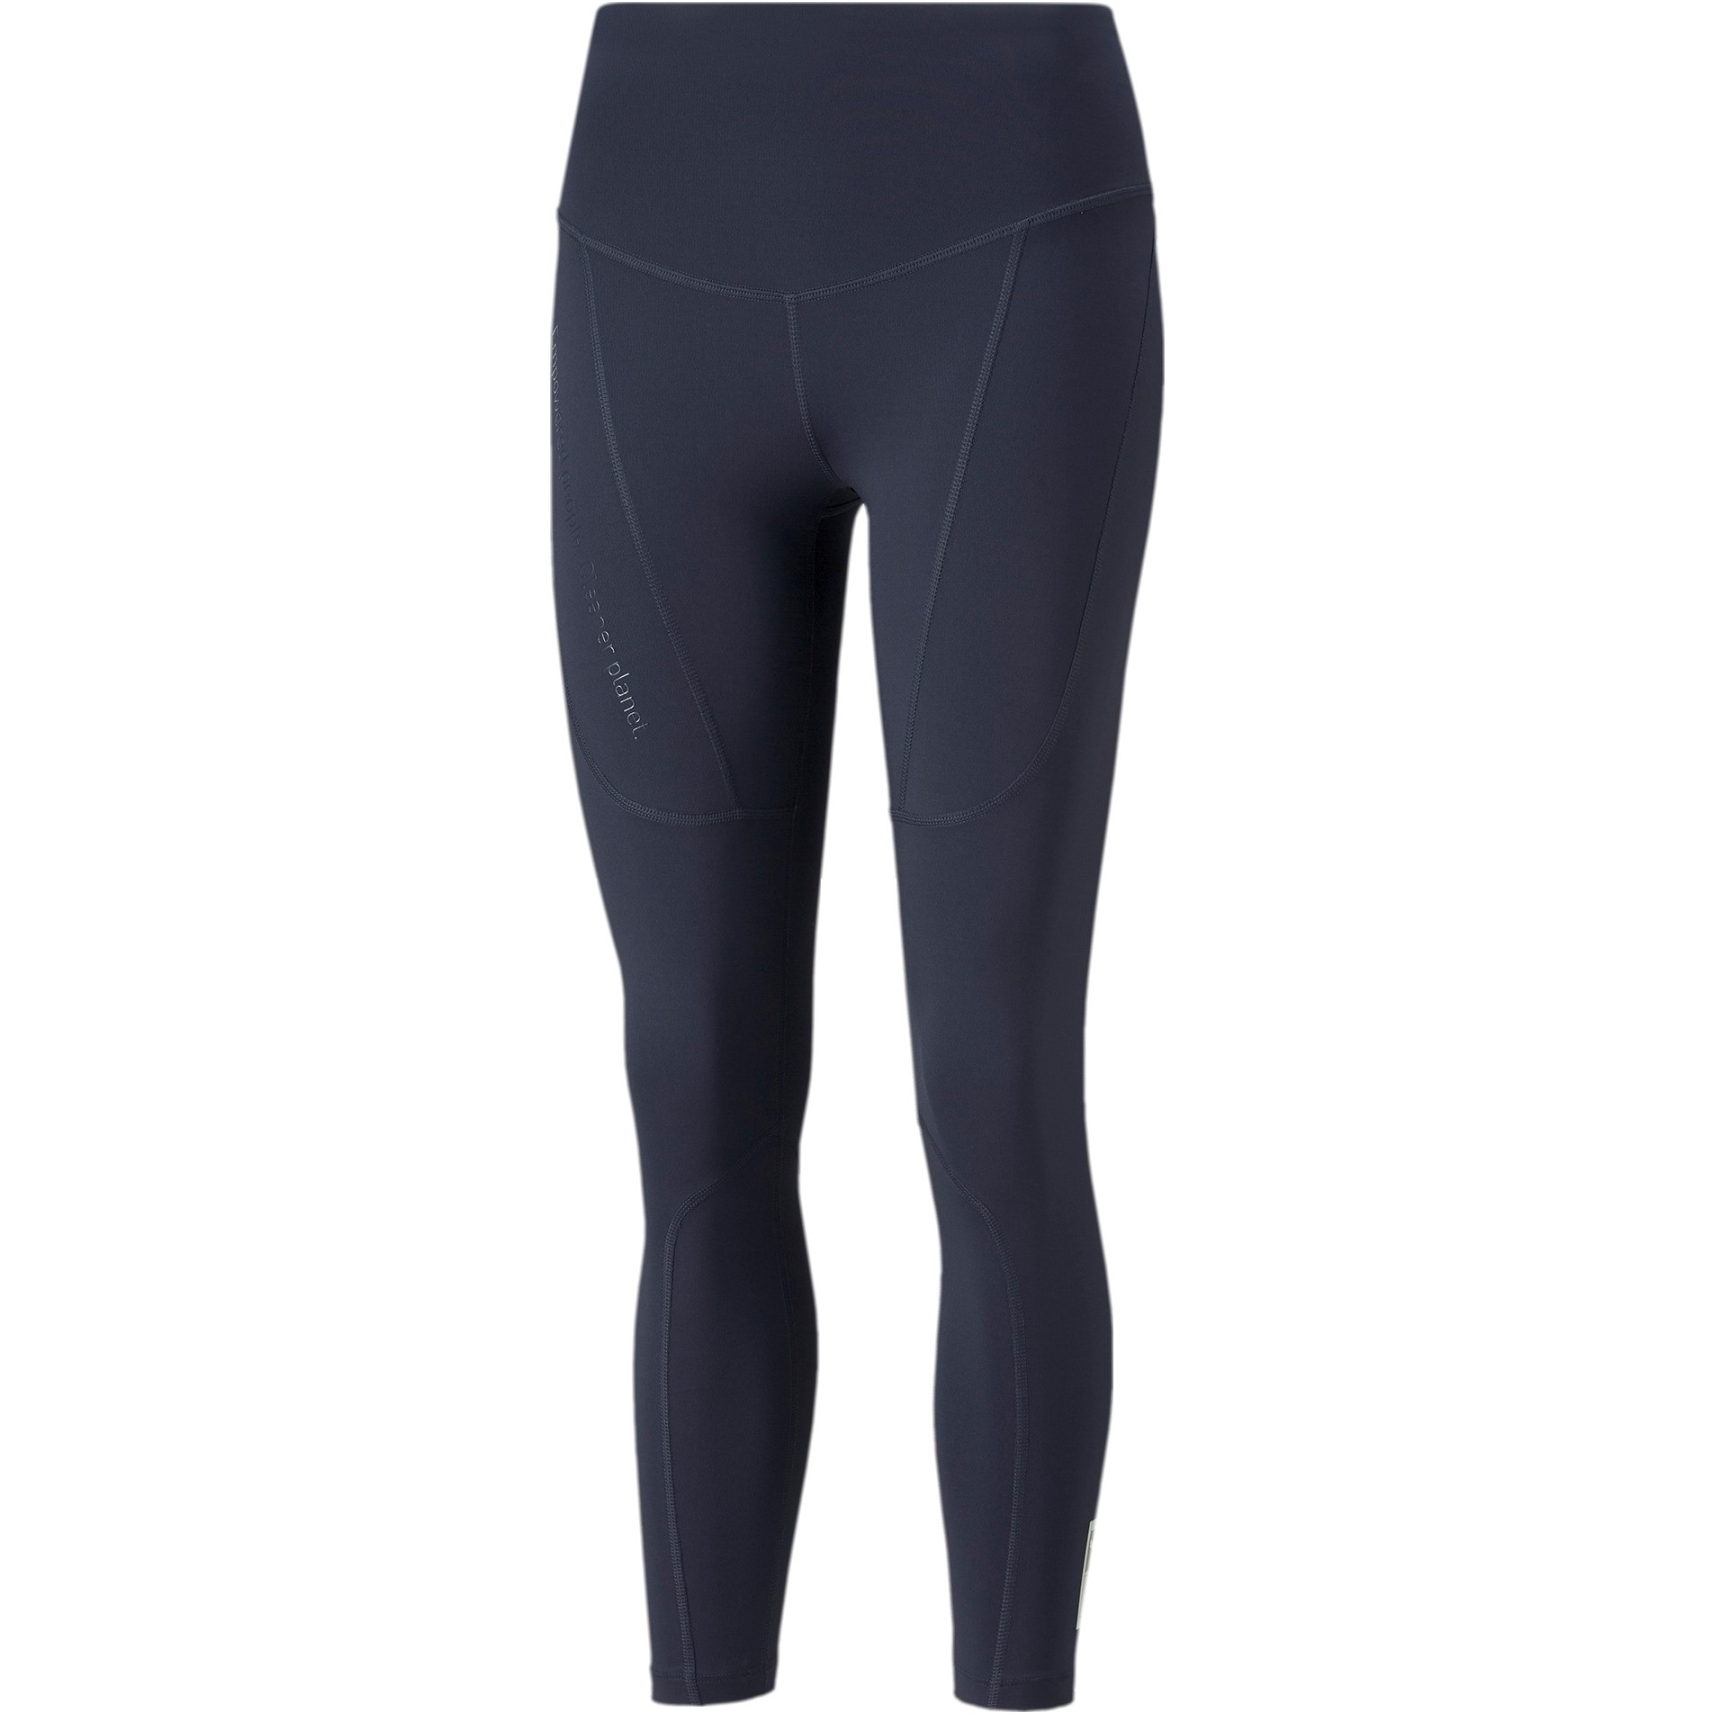 Picture of Puma x FIRST MILE 7/8 Running Tights Women - Parisian Night